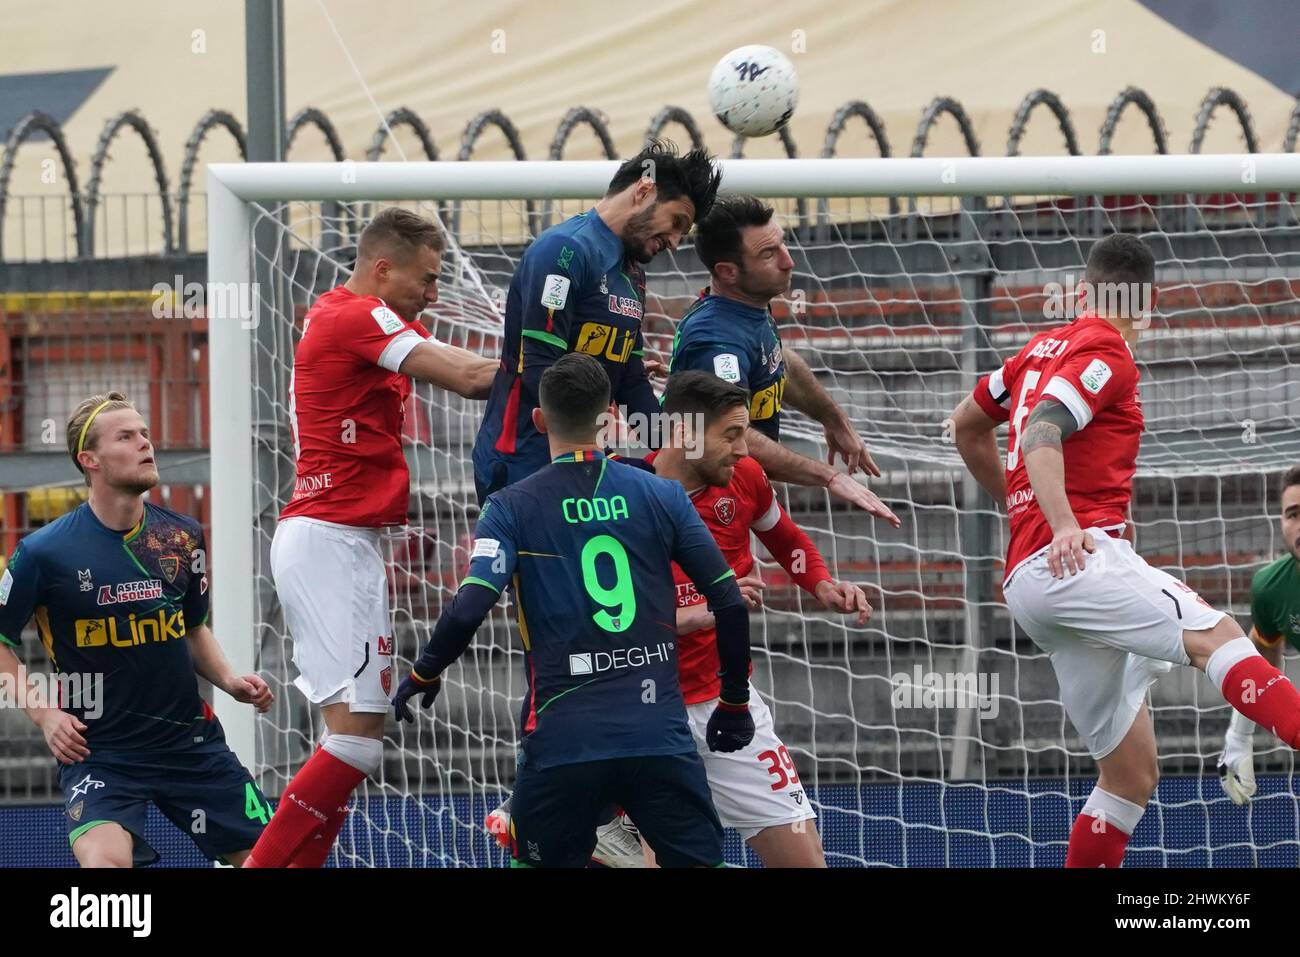 Serie B: Perugia-Benevento howler investigated for potential match-fixing -  Football Italia